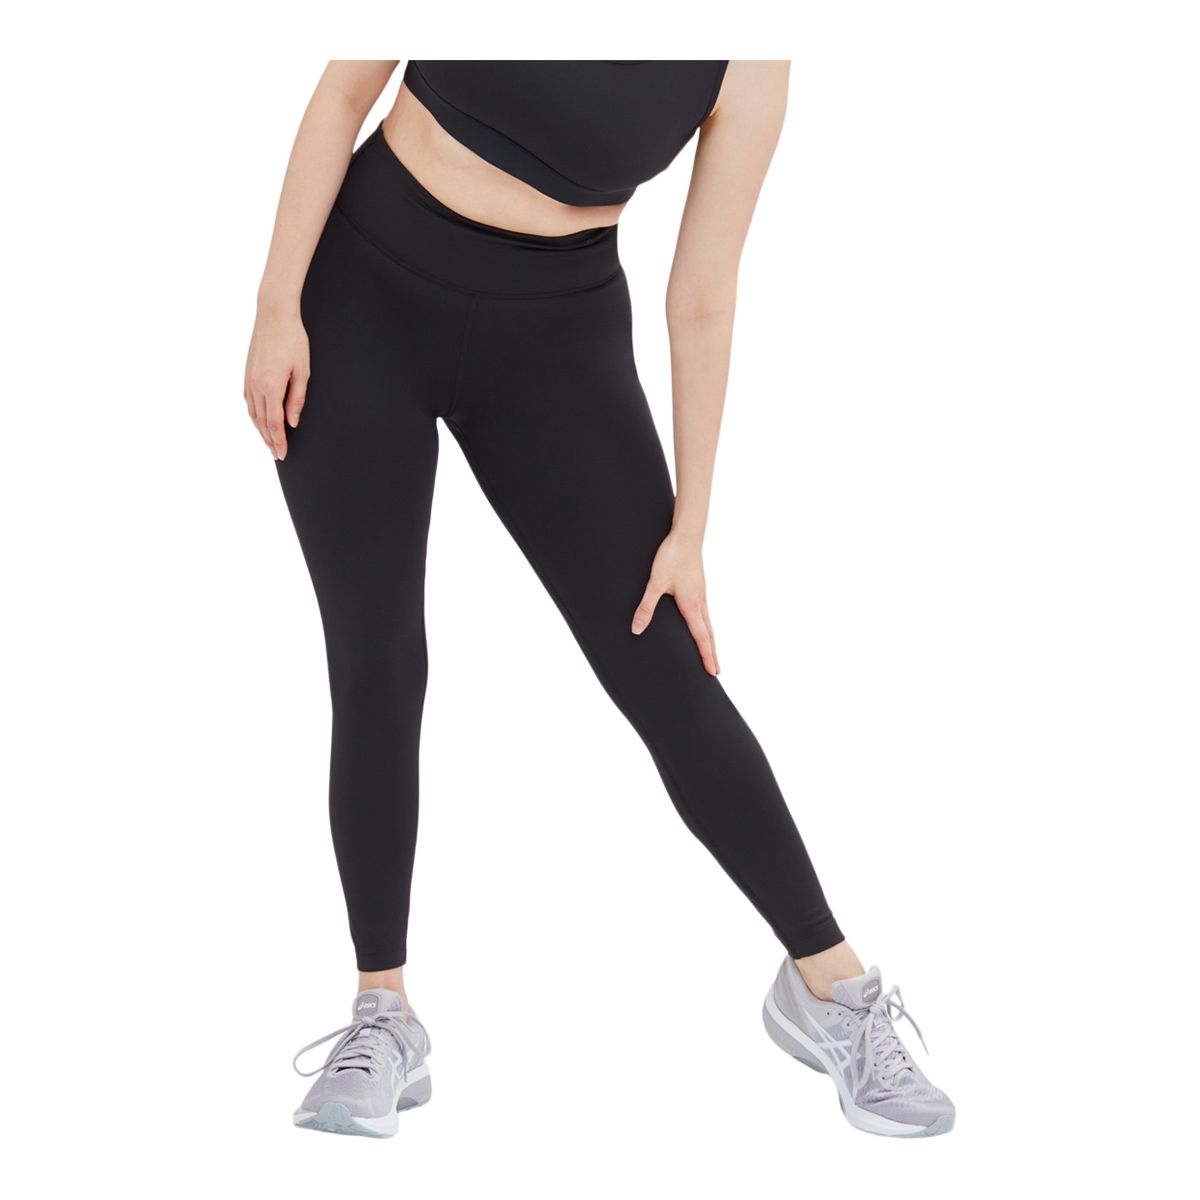 https://media-www.sportchek.ca/product/div-03-softgoods/dpt-70-athletic-clothing/sdpt-02-womens/334030646/tentree-women-s-inmotion-high-rise-leggings-be75b7f2-bc77-4f42-adef-f5e694578336-jpgrendition.jpg